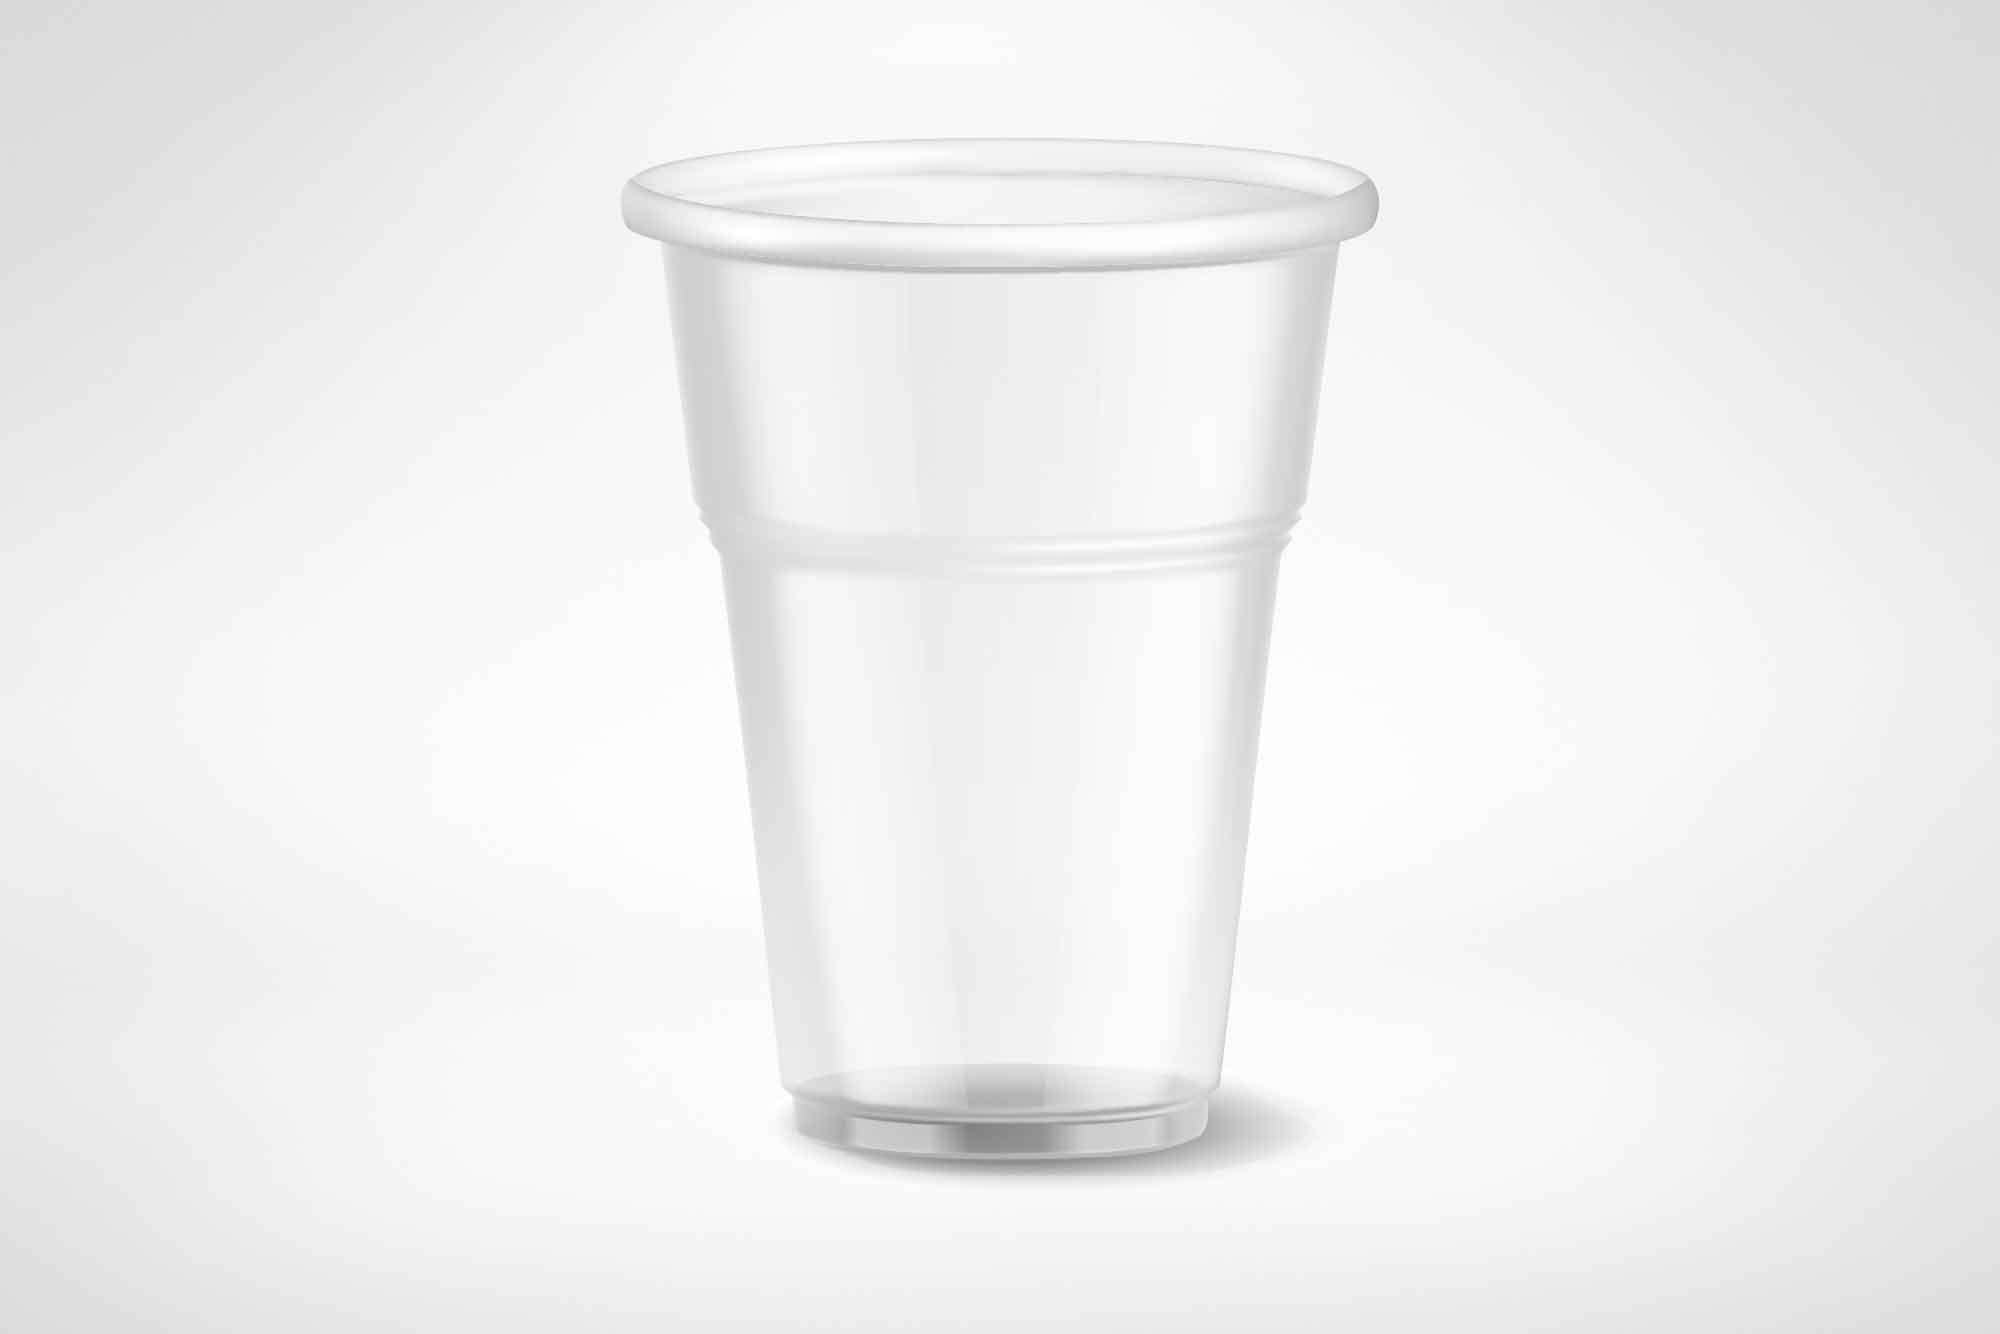 Large Plastic Cup